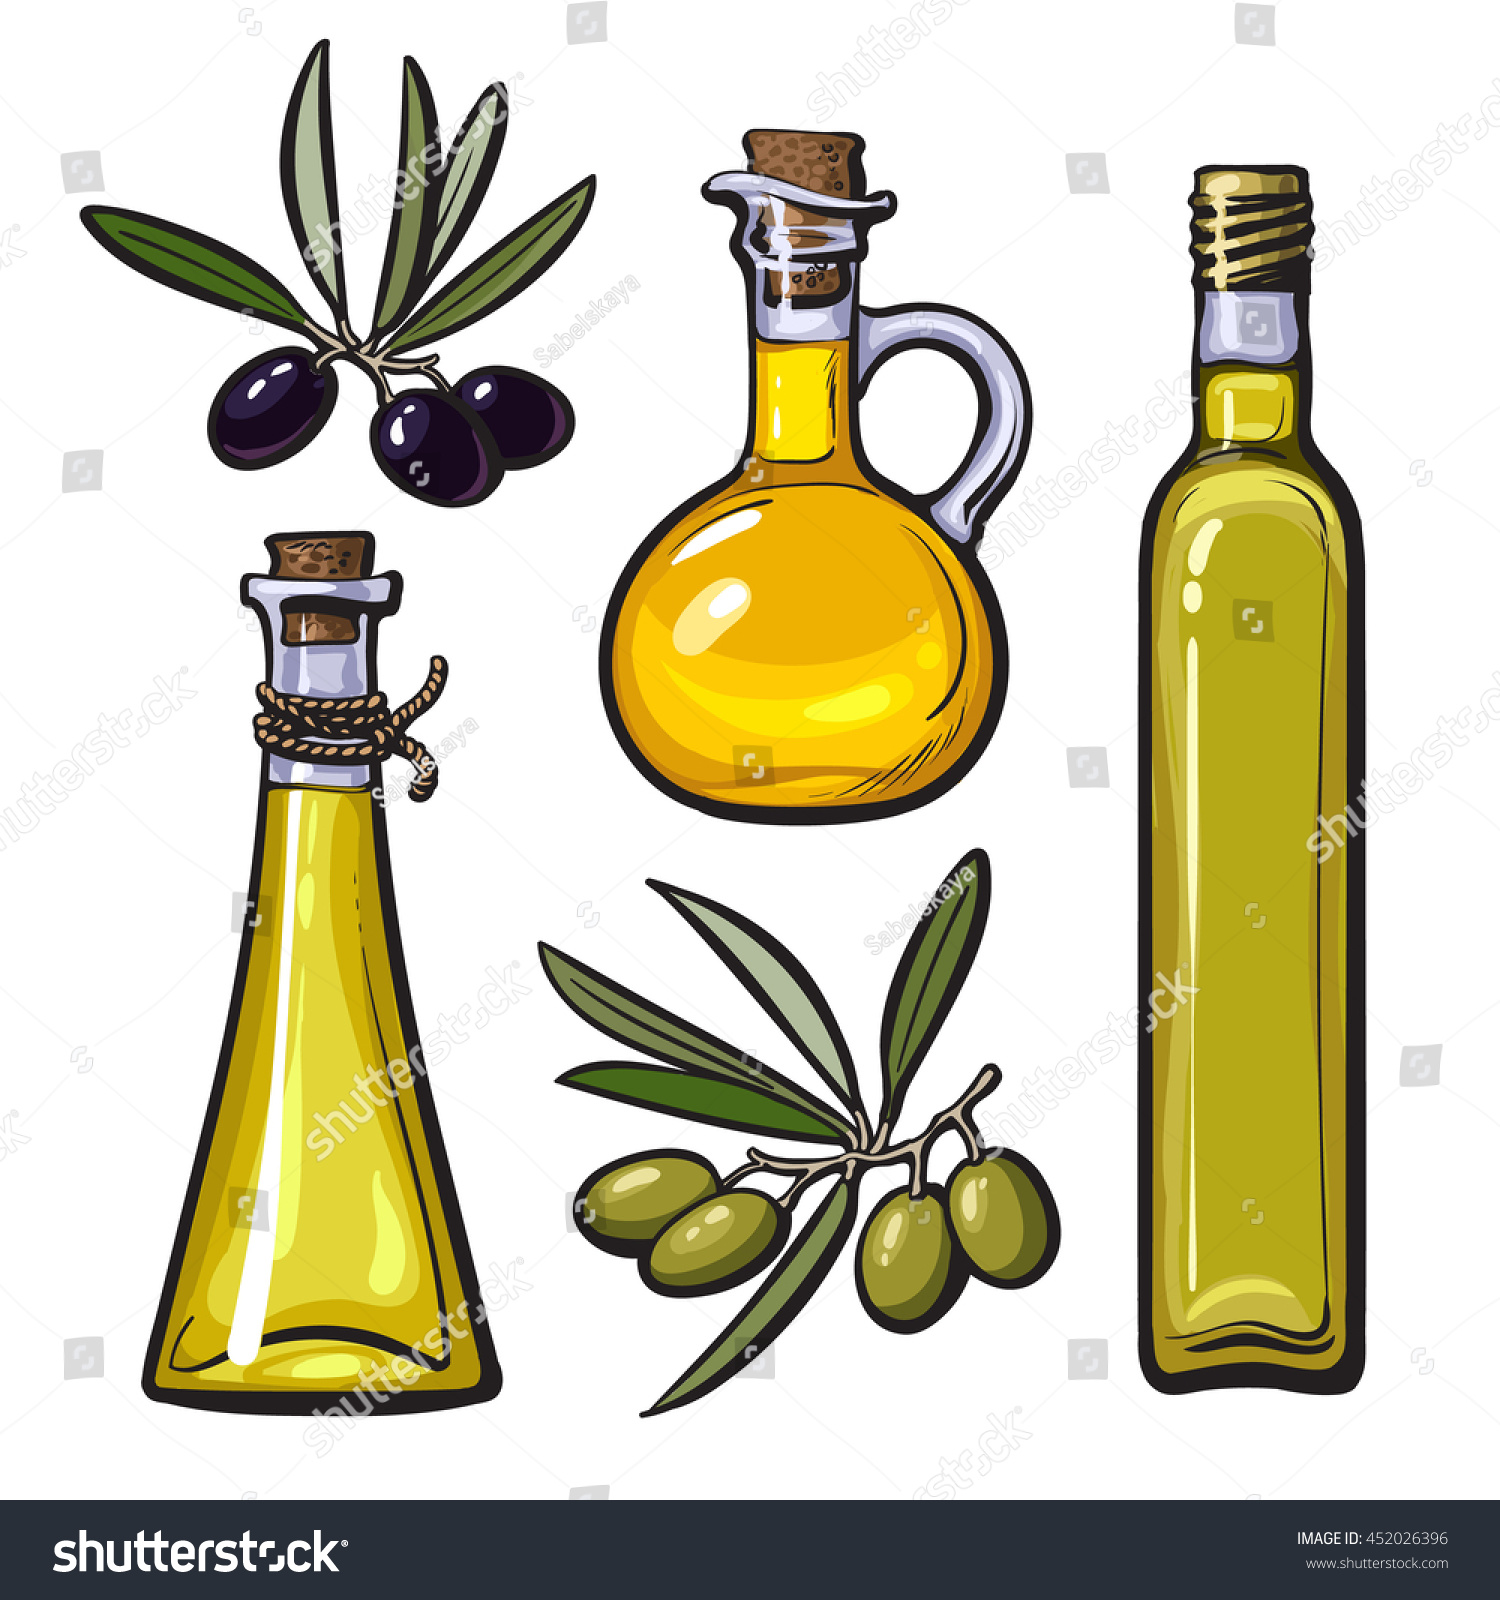 Set Of Olive Oil Bottles With Black And Green Royalty Free Stock Vector 452026396 